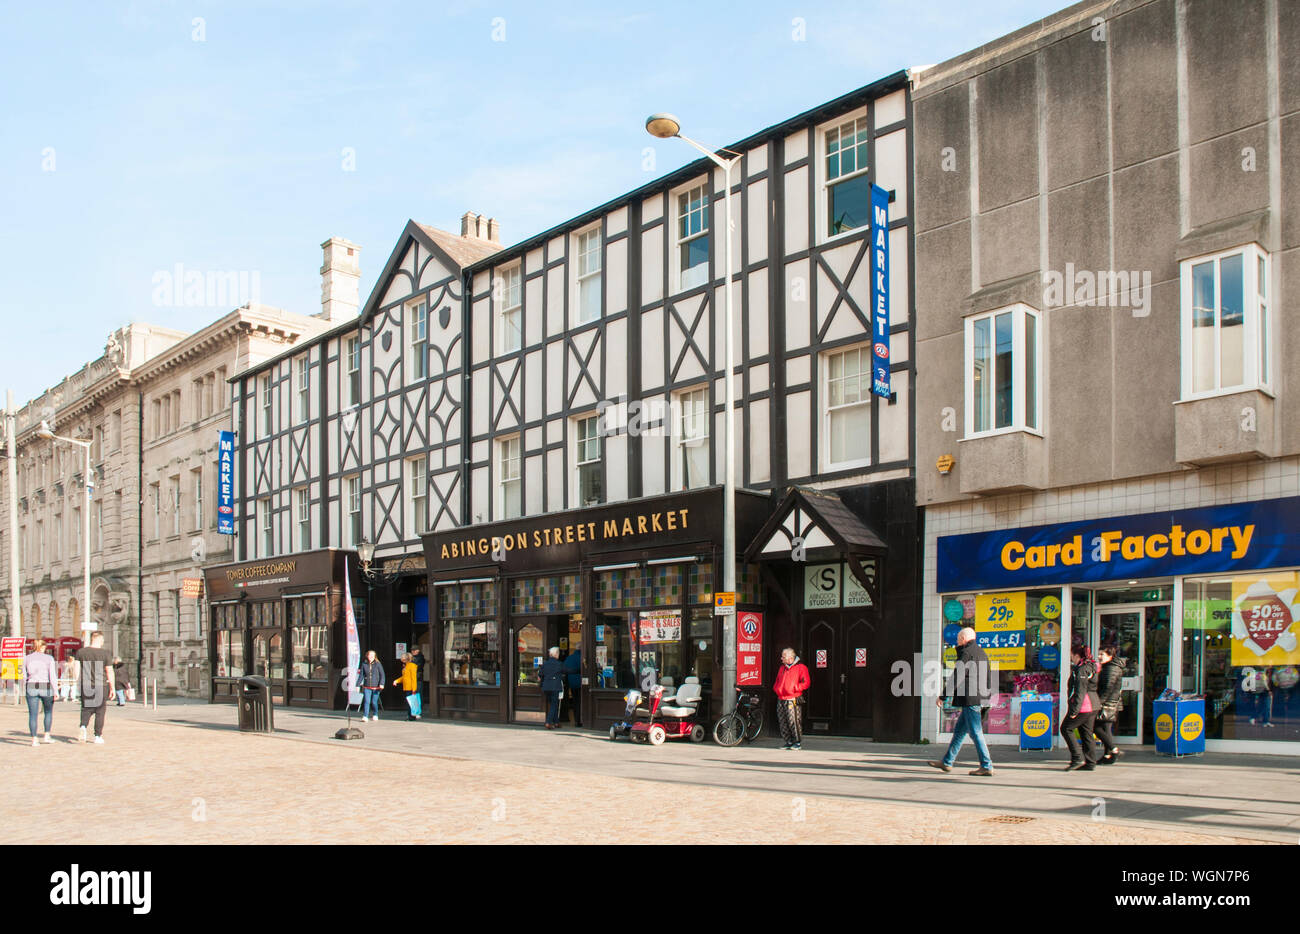 Three types of building architecture, Ex Post Office, Market and Card Factory Shop next to each other Further information on additional info Stock Photo